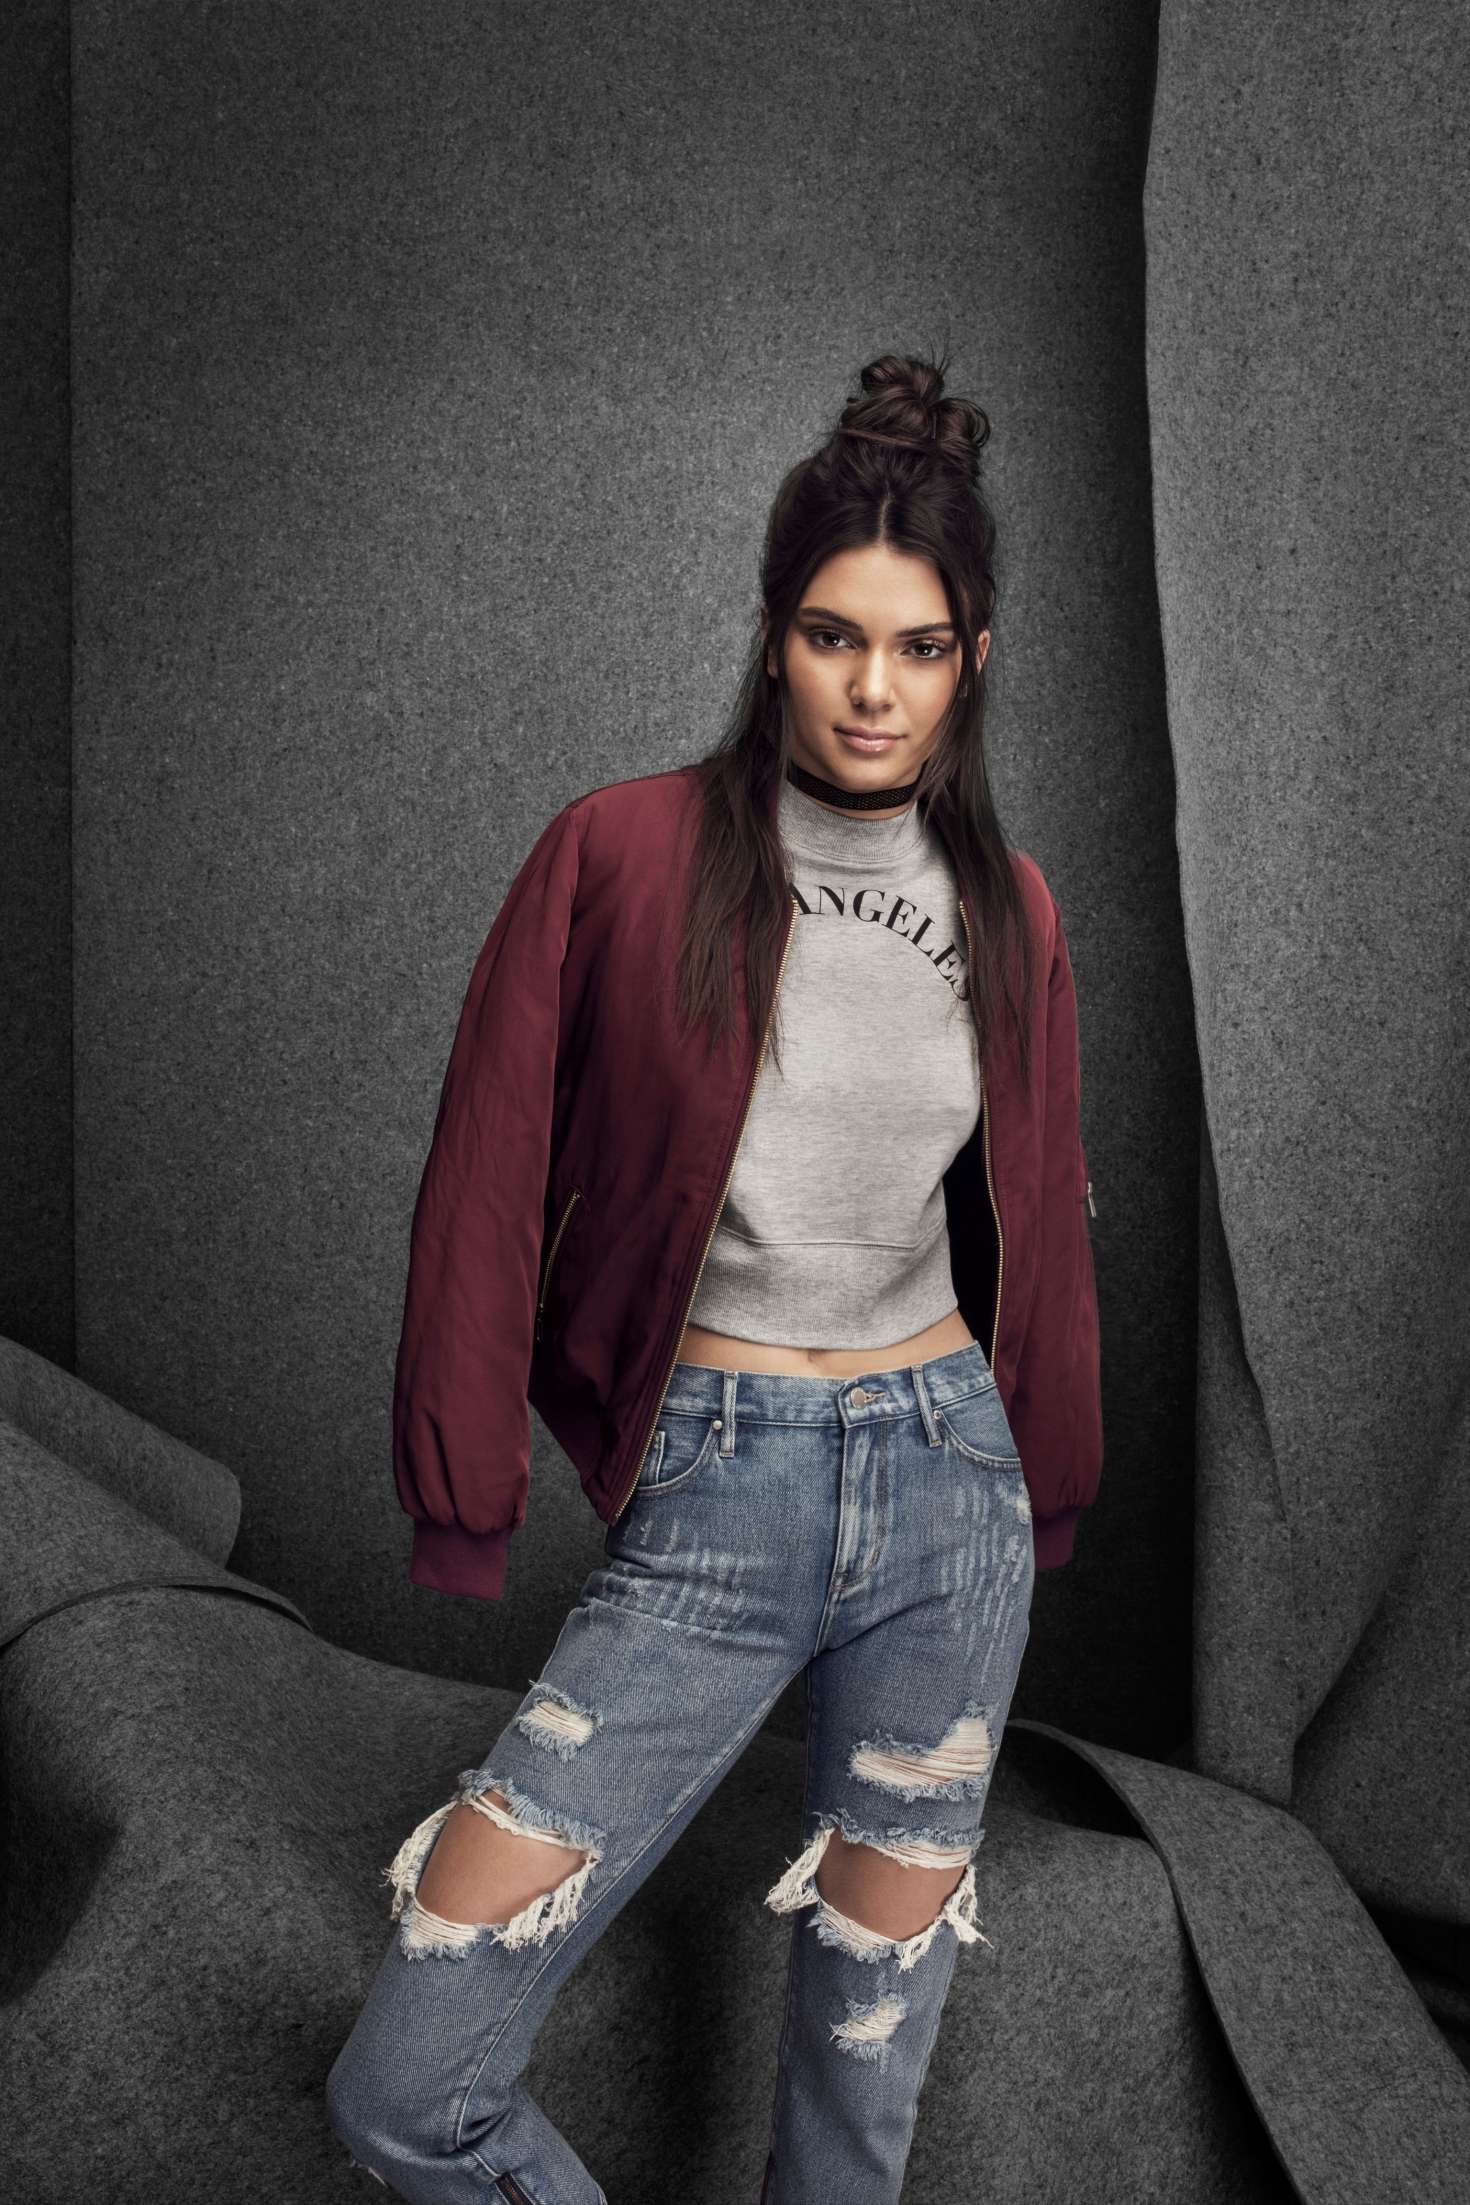 Kendall and Kylie Jenner - Golden Child PacSun Collection 2016